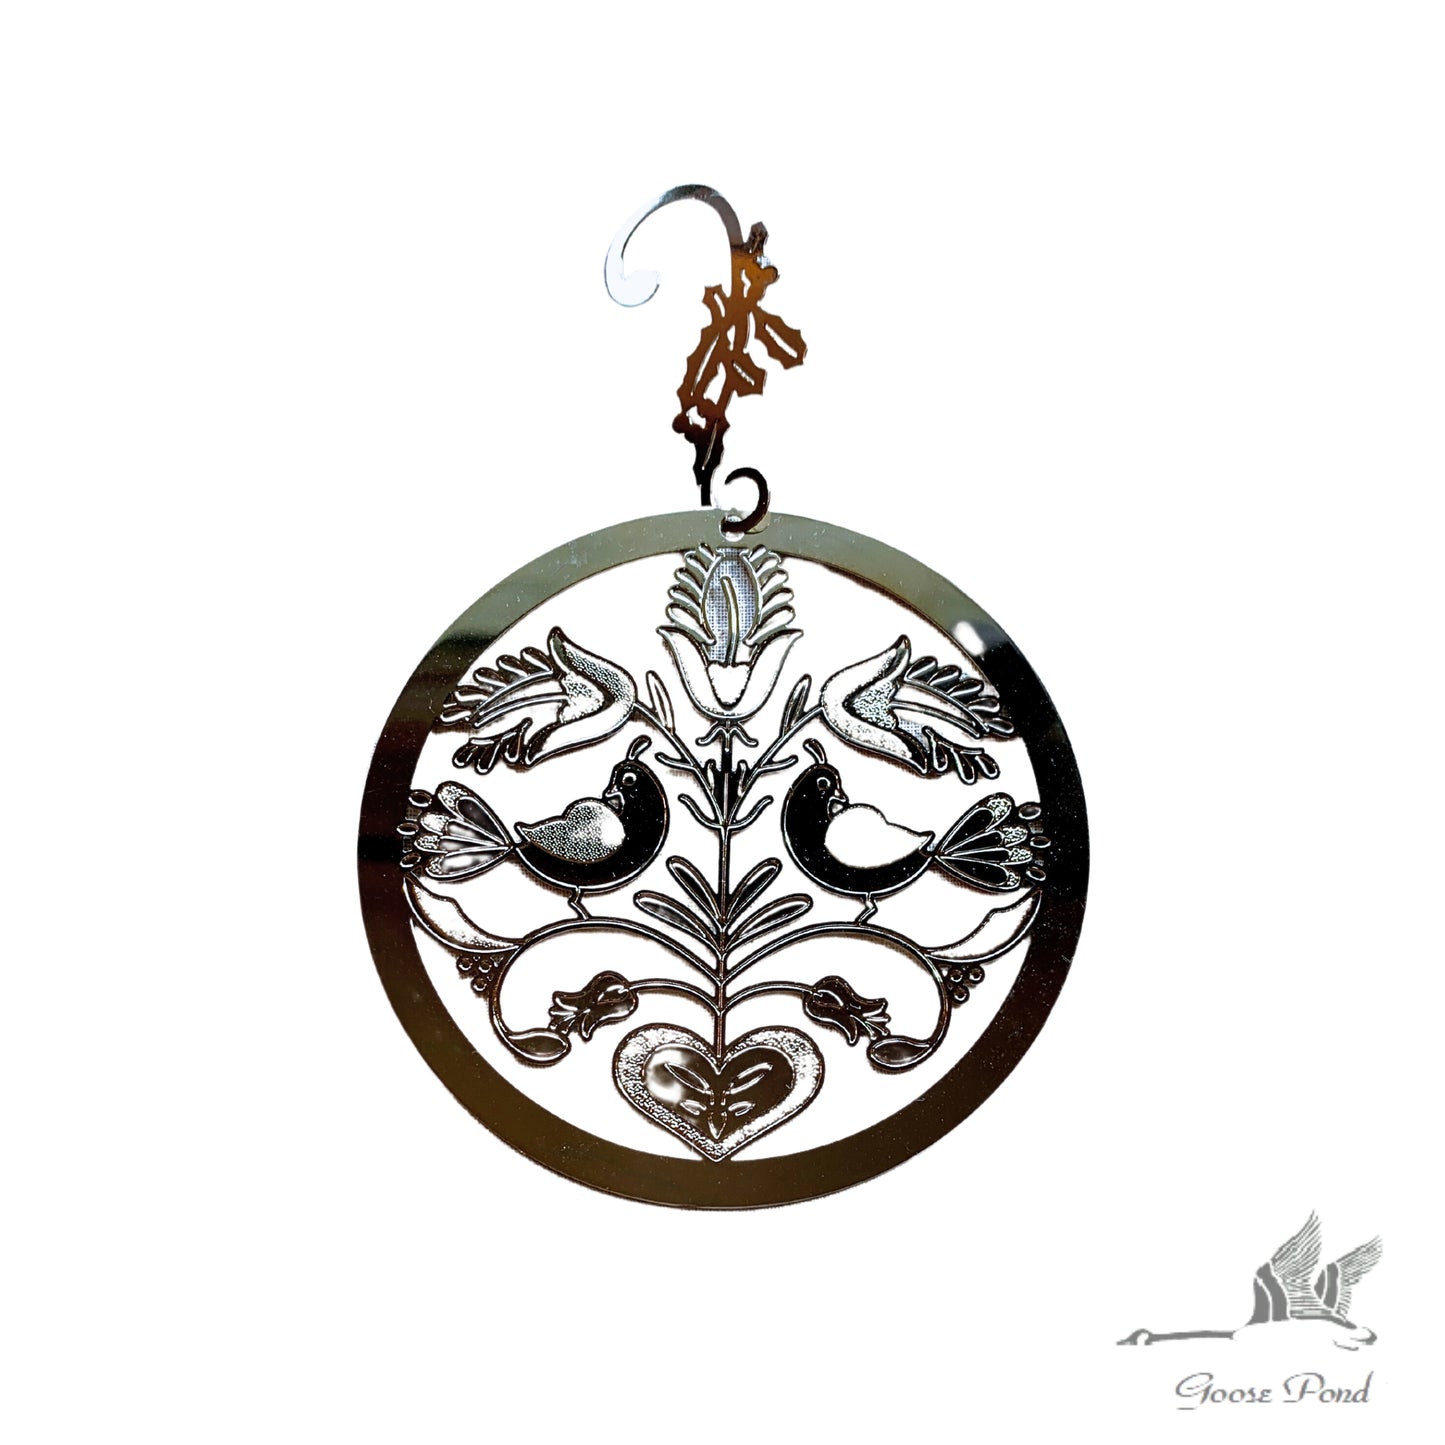 Goose Pond Handcrafted Heirloom Ornaments - Silver Tone